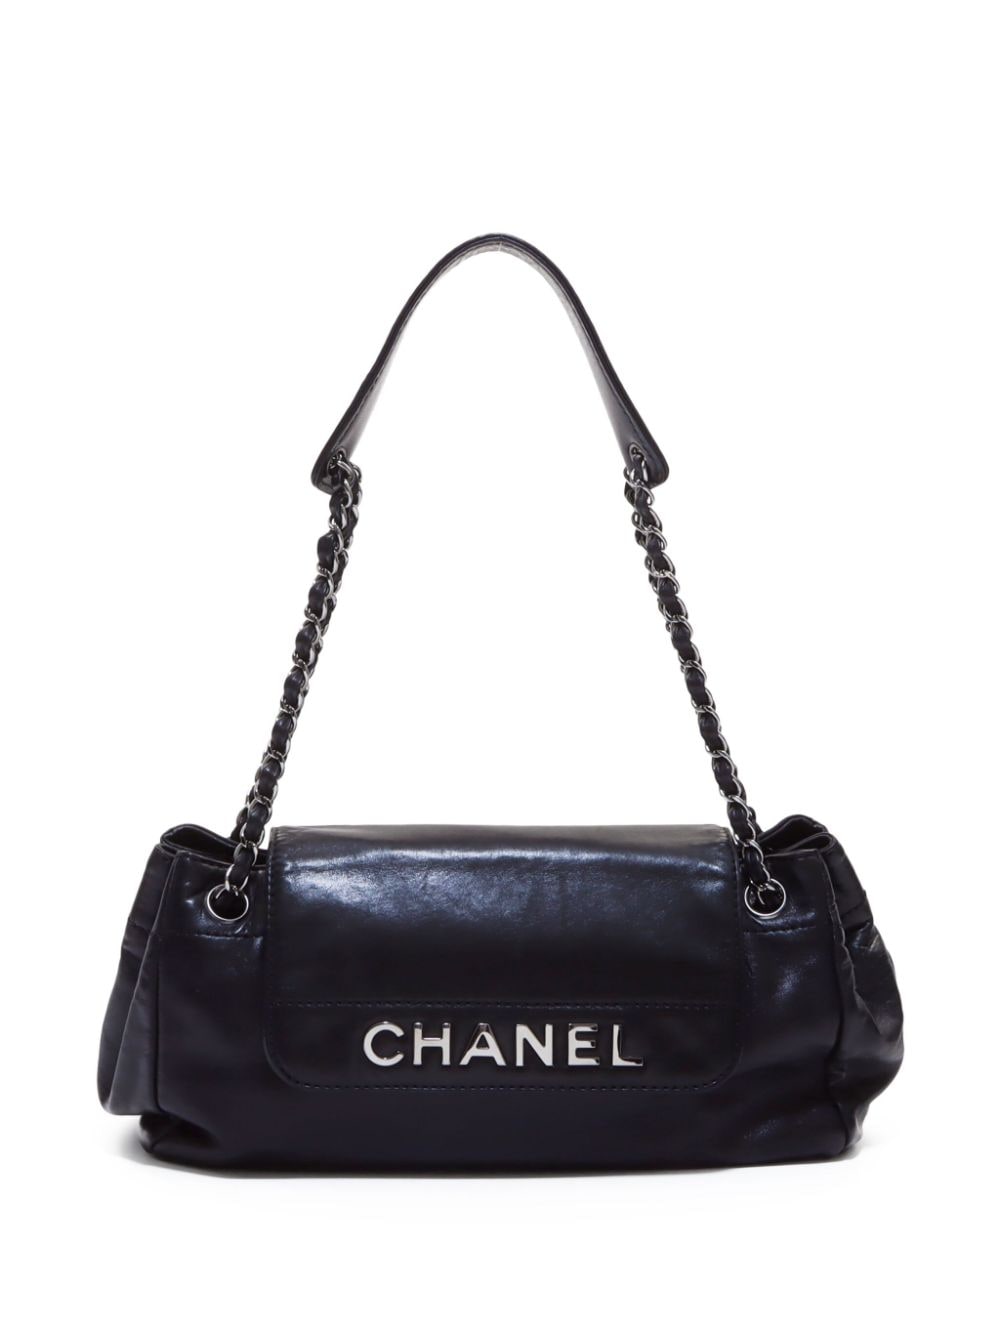 CHANEL Pre-Owned 2005-2006 Rock and Chic Handtasche - Schwarz von CHANEL Pre-Owned